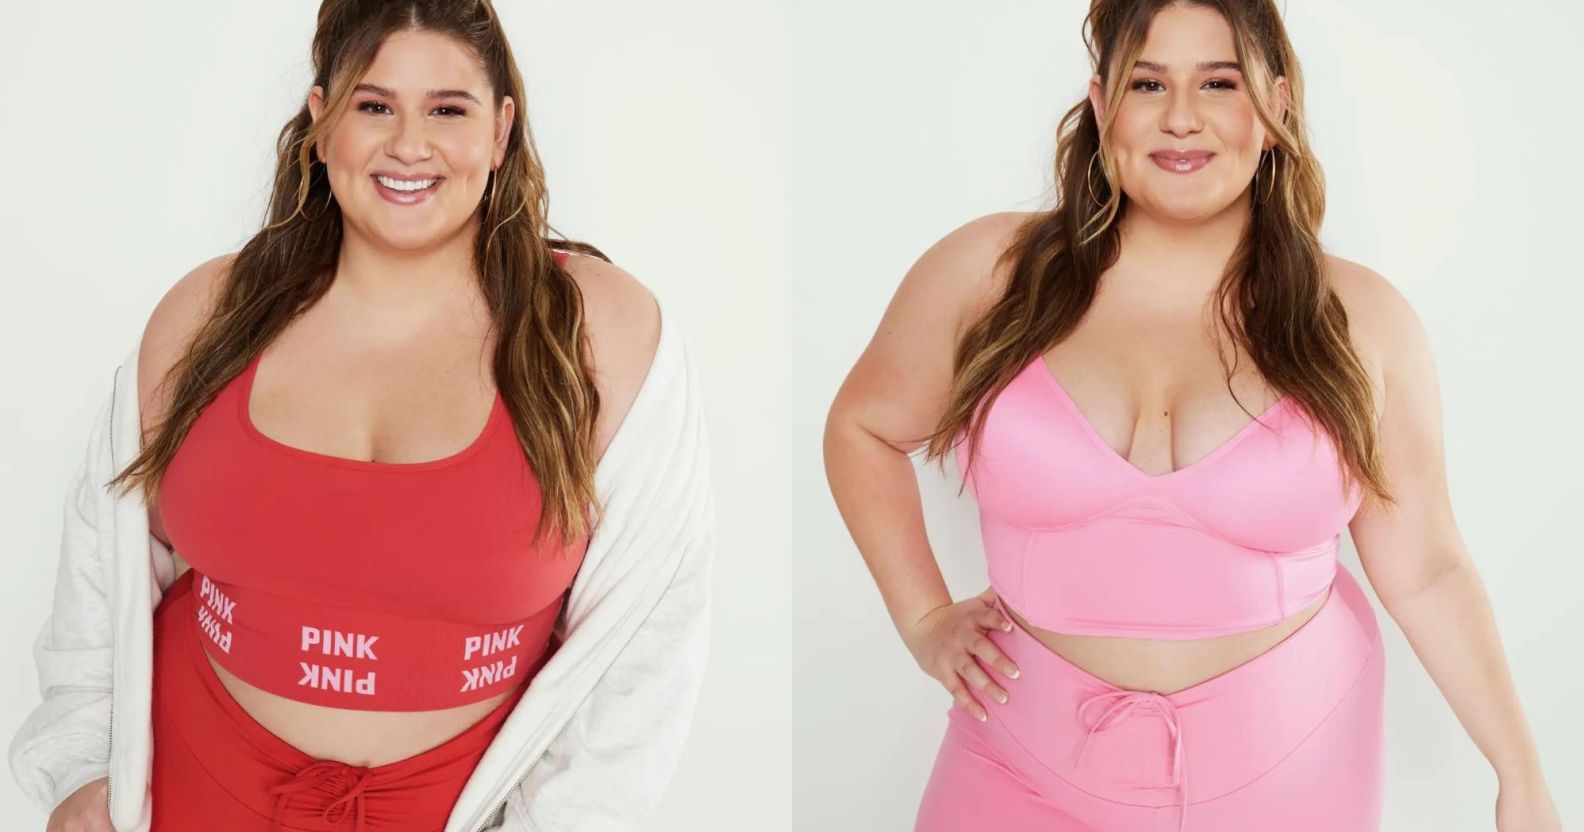 TikTok star and curvy model Remi Bader is one of the new faces of Victoria's Secret.